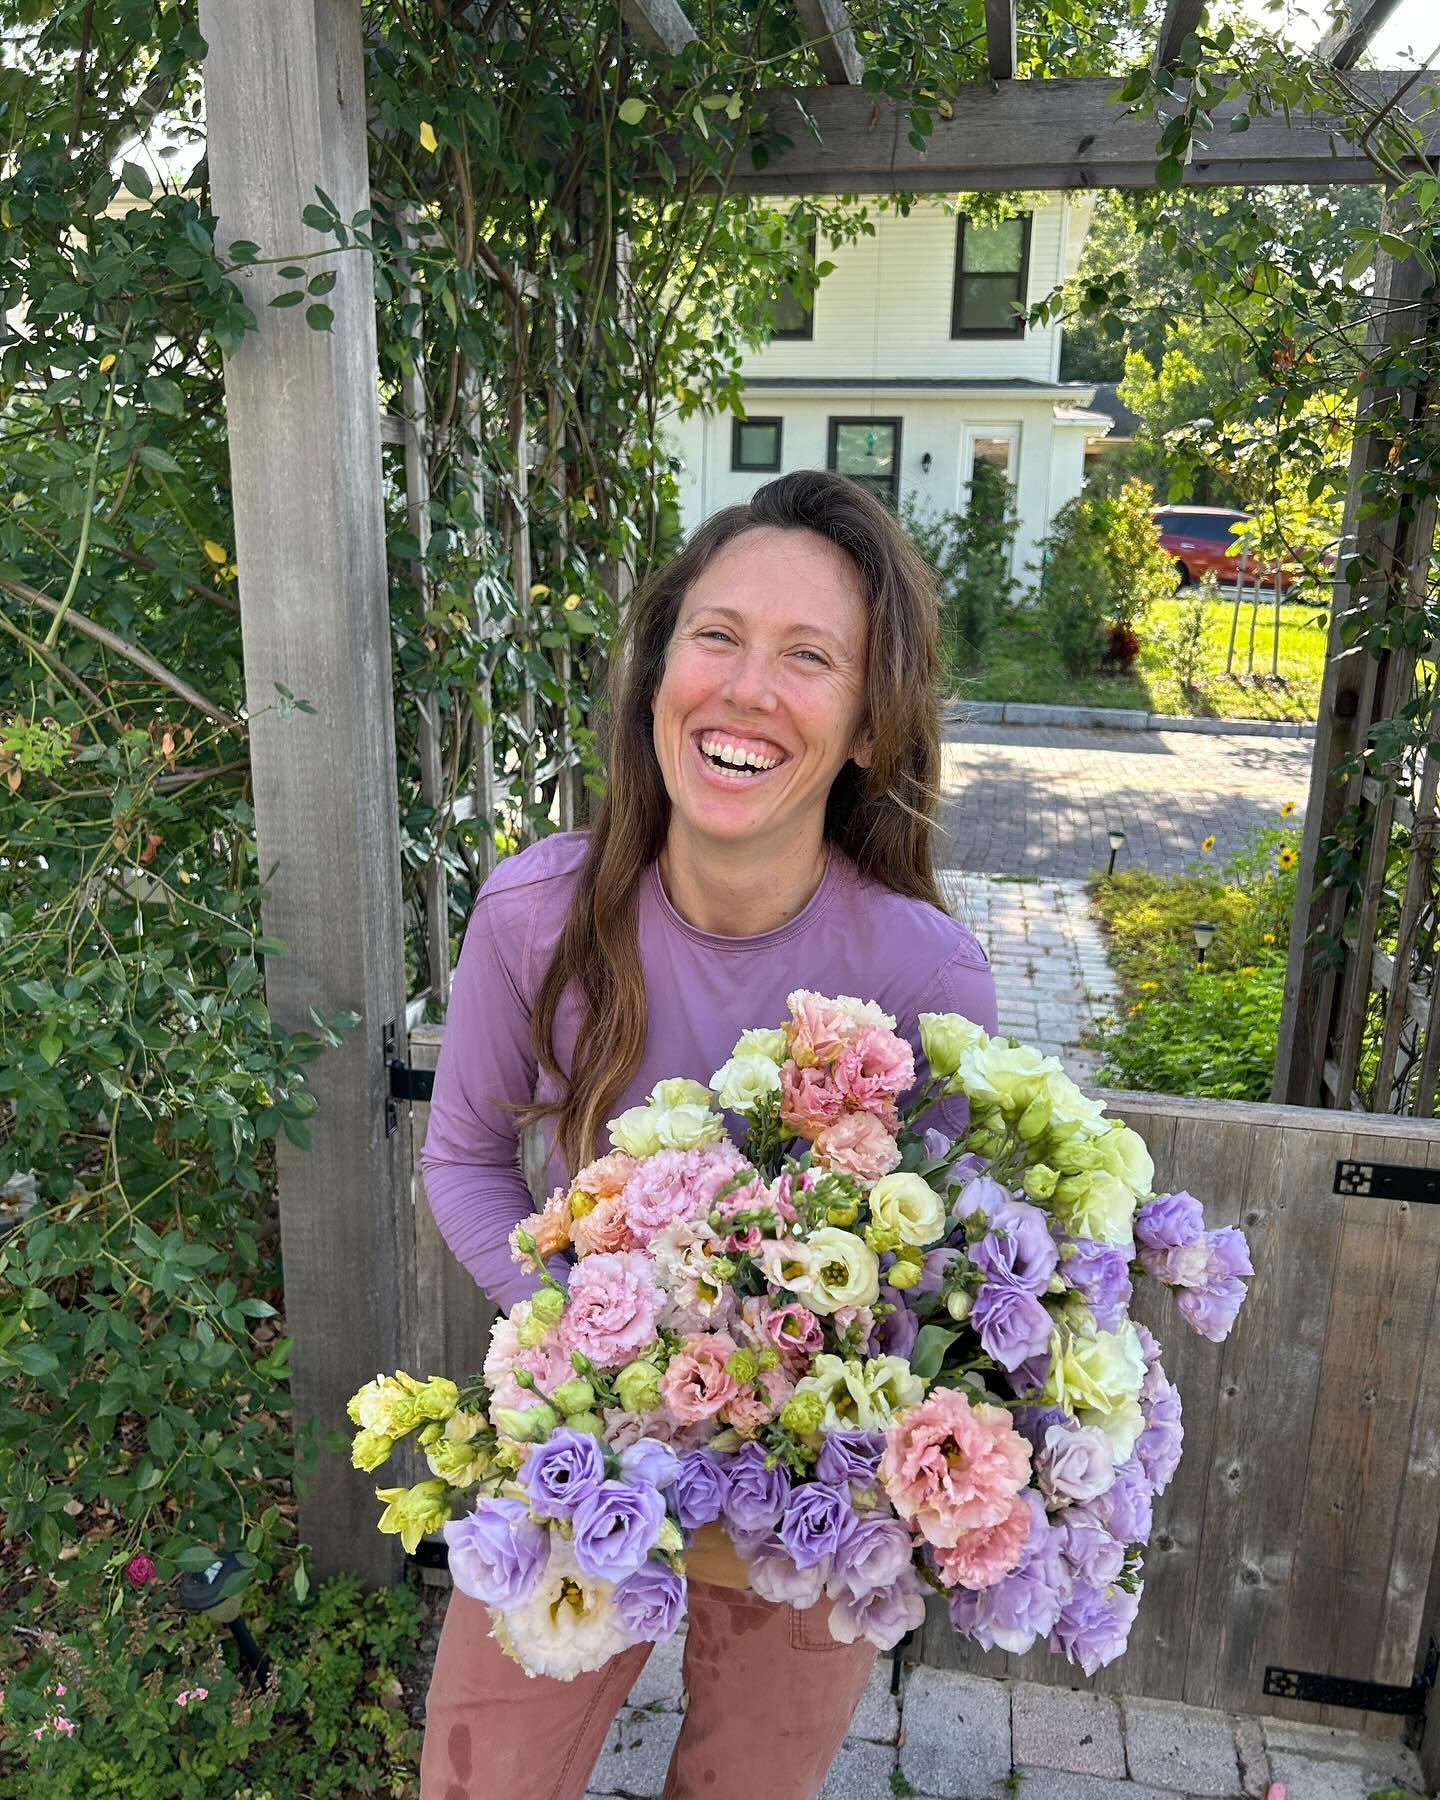 Happy Lisianthus Gate Photo Day to all who celebrate. 💫 It falls somewhere between my birthday and Mother&rsquo;s Day on a morning when both Paul and I are home and the lisianthus are plentiful. ➡️ Swipe to see the past 4 years and the progress of o